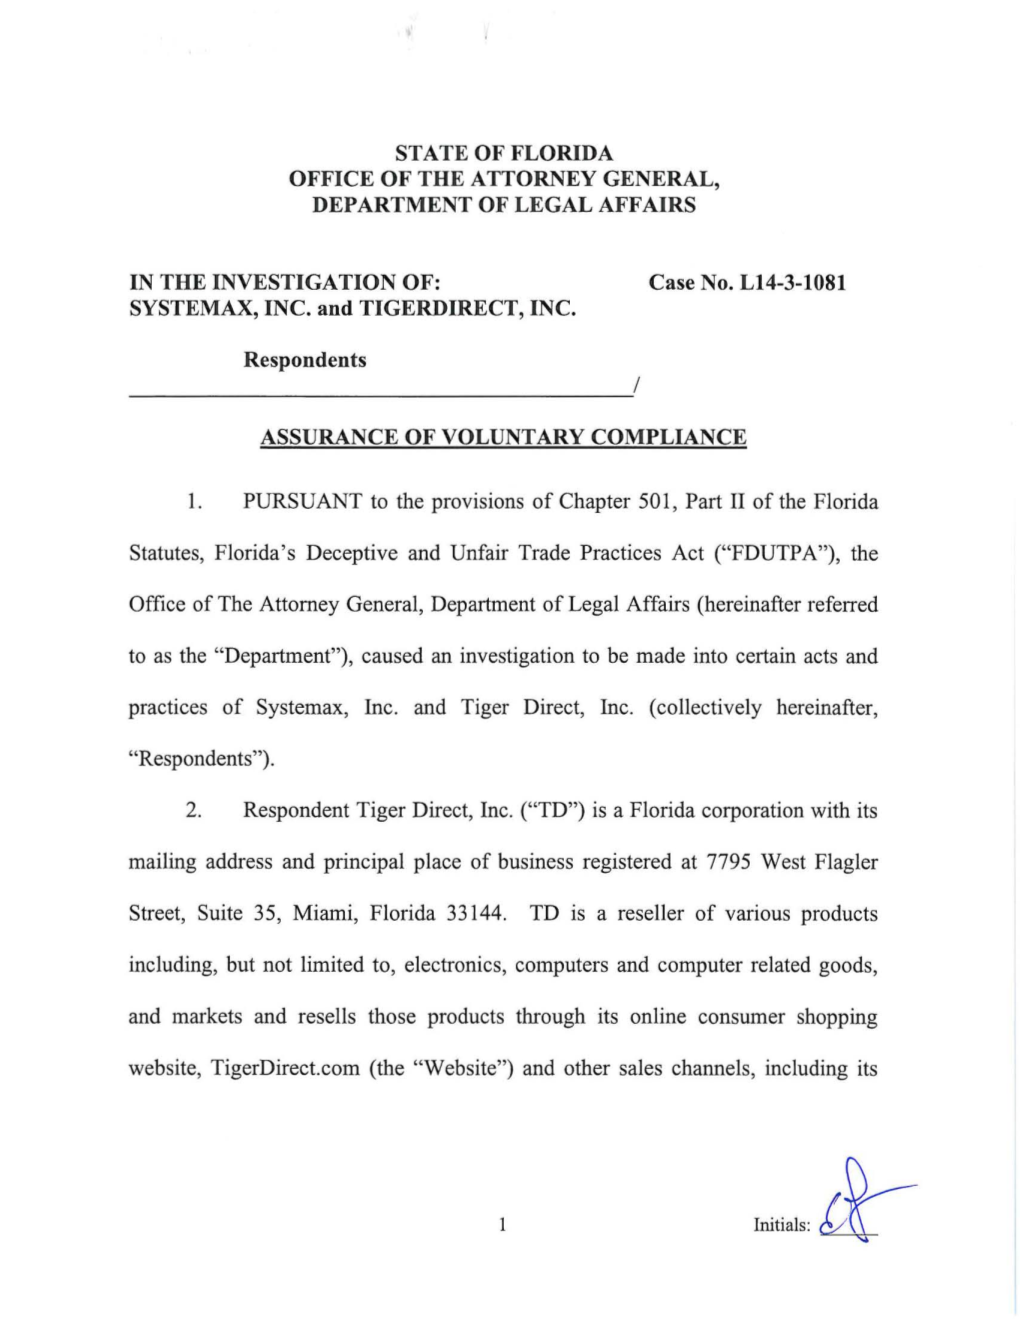 PURSUANT to the Provisions of Chapter 501 , Part II of the Florida